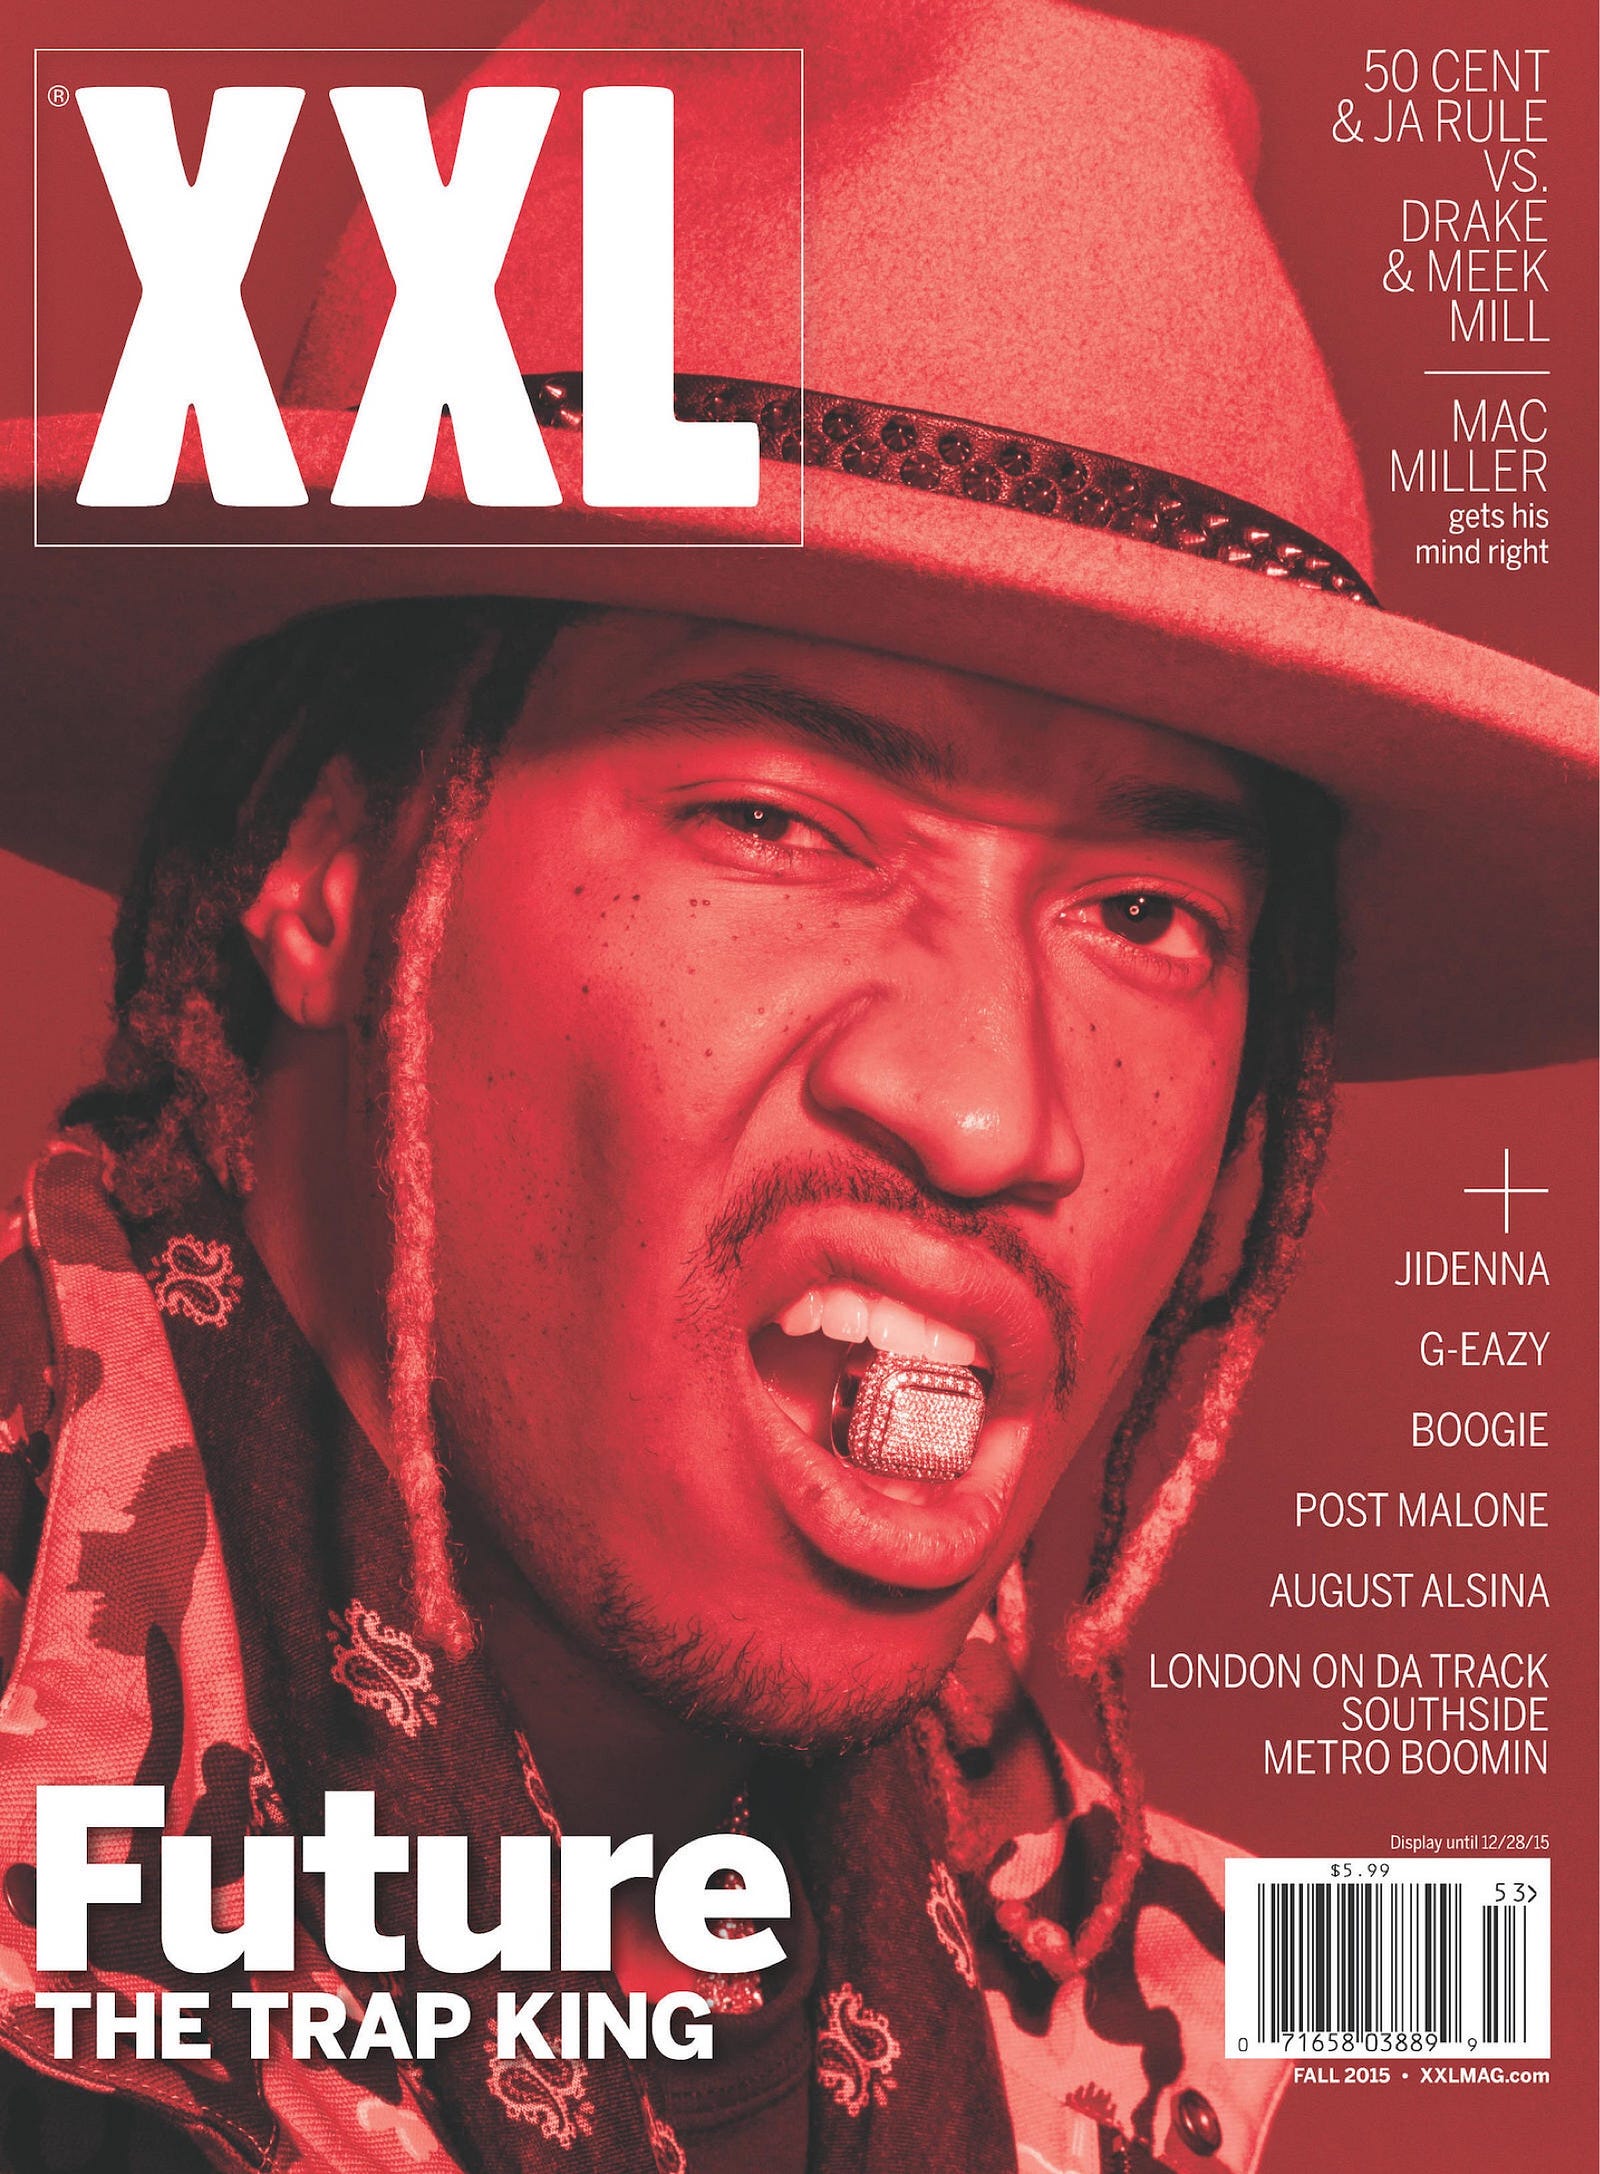 How Multi-National Corporations Stifled the Voices of Rap Magazines